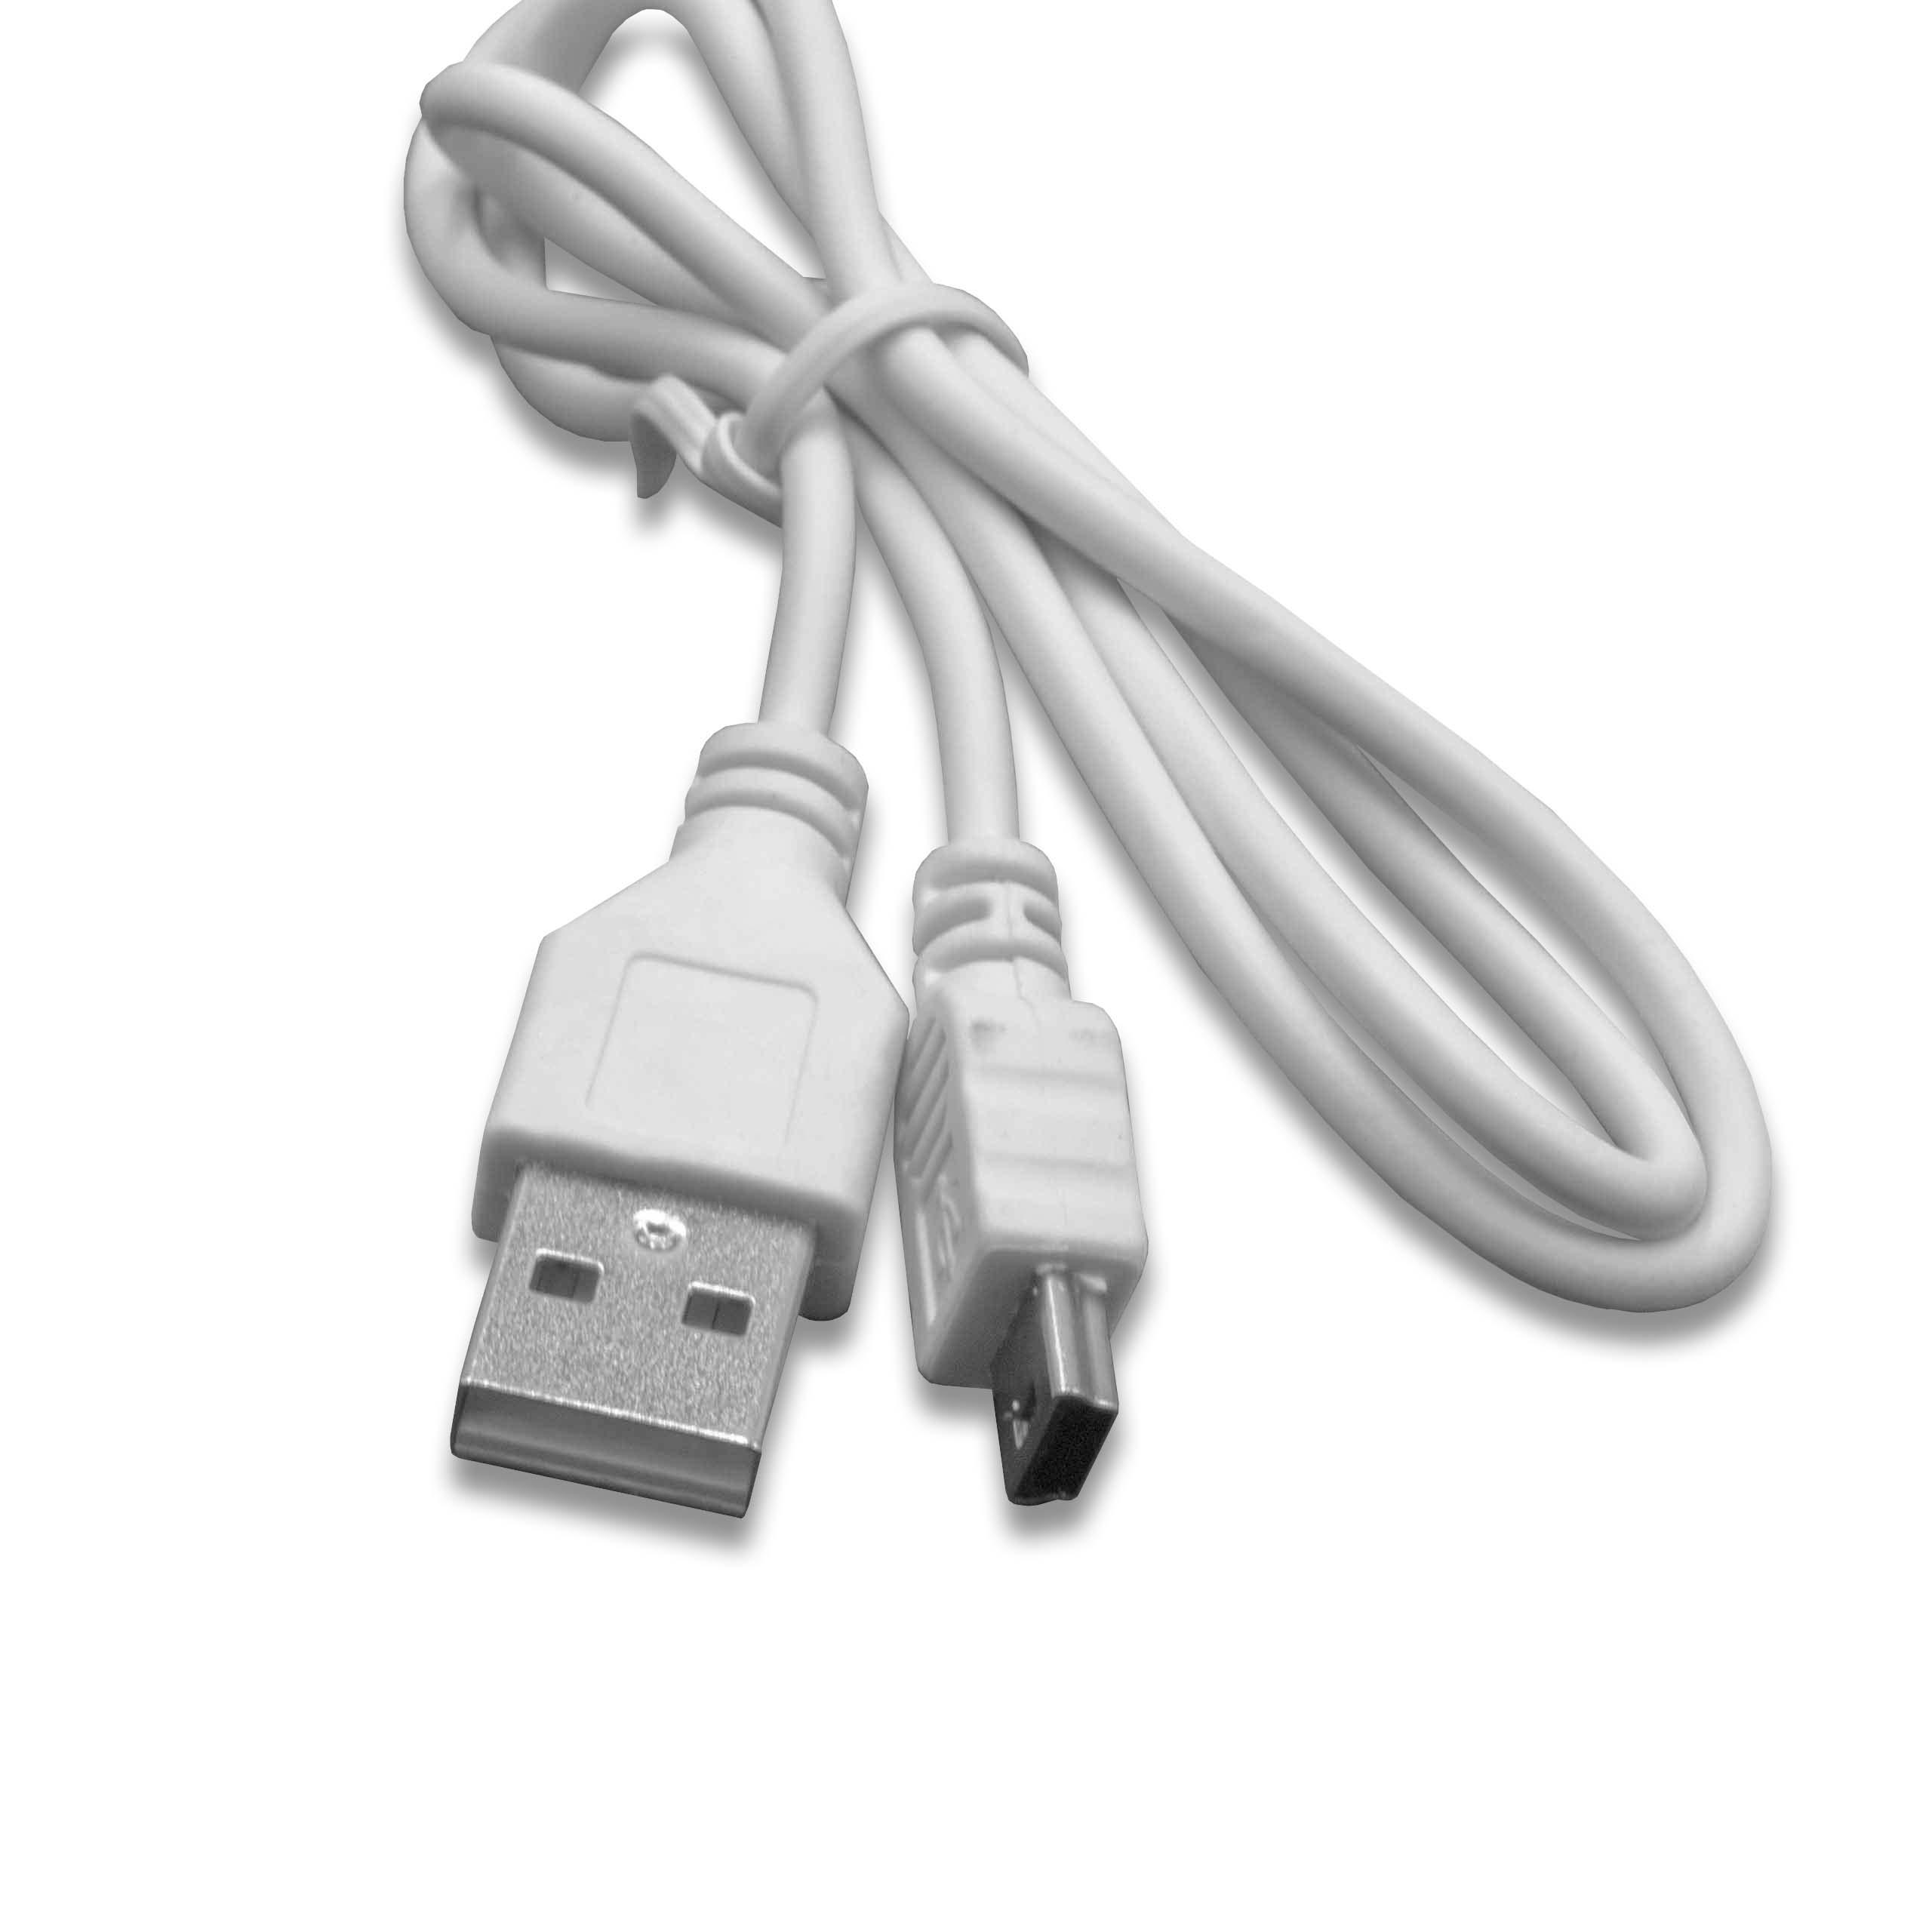 VGA to HDMI Converter Adapter Cable for Computer Monitor, Television, PC, Laptop, Desktop Display - white 